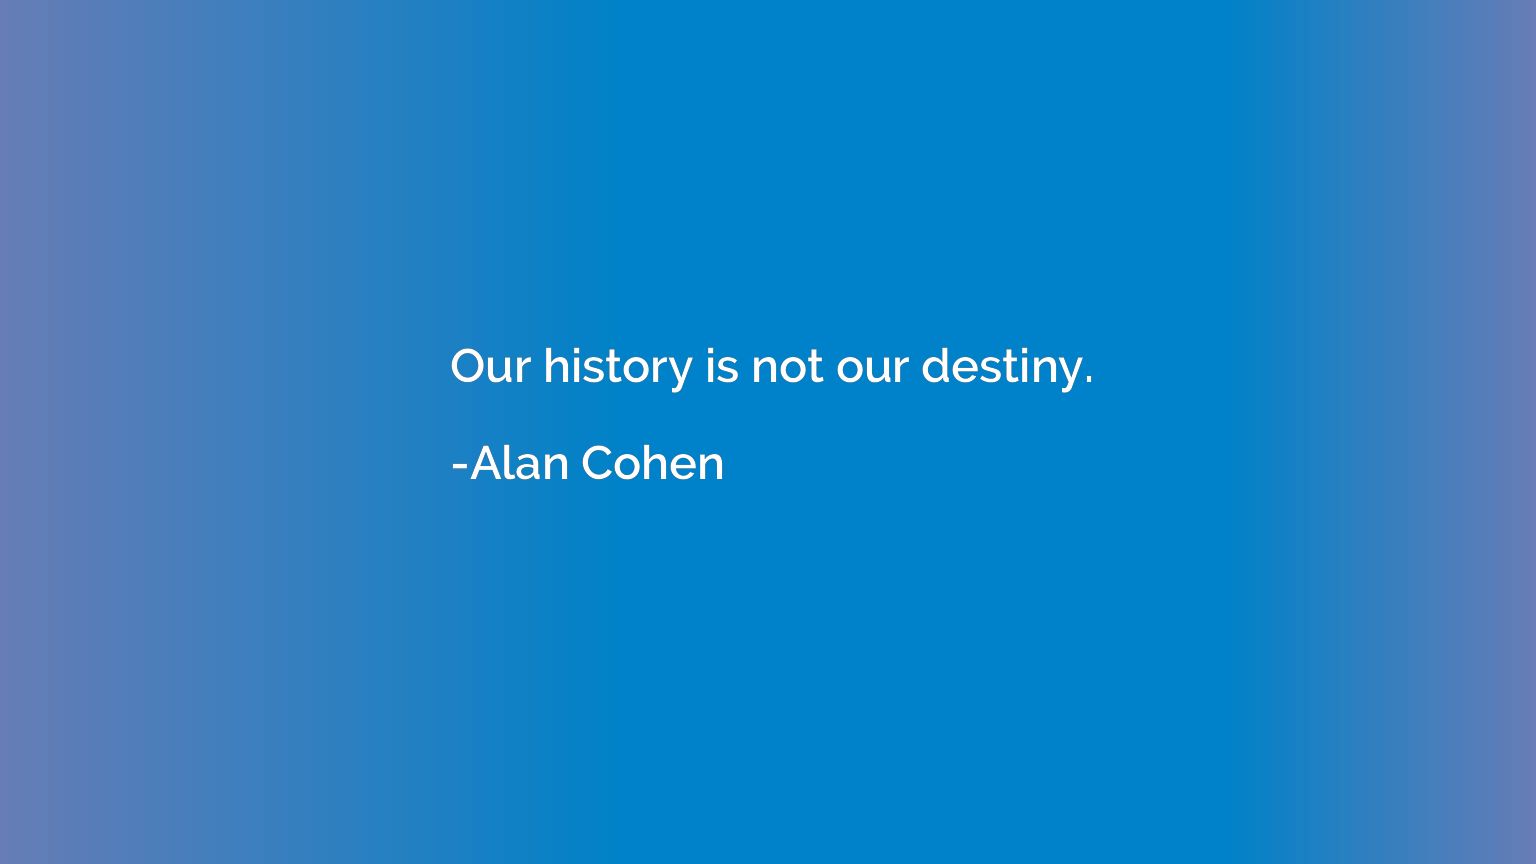 Our history is not our destiny.